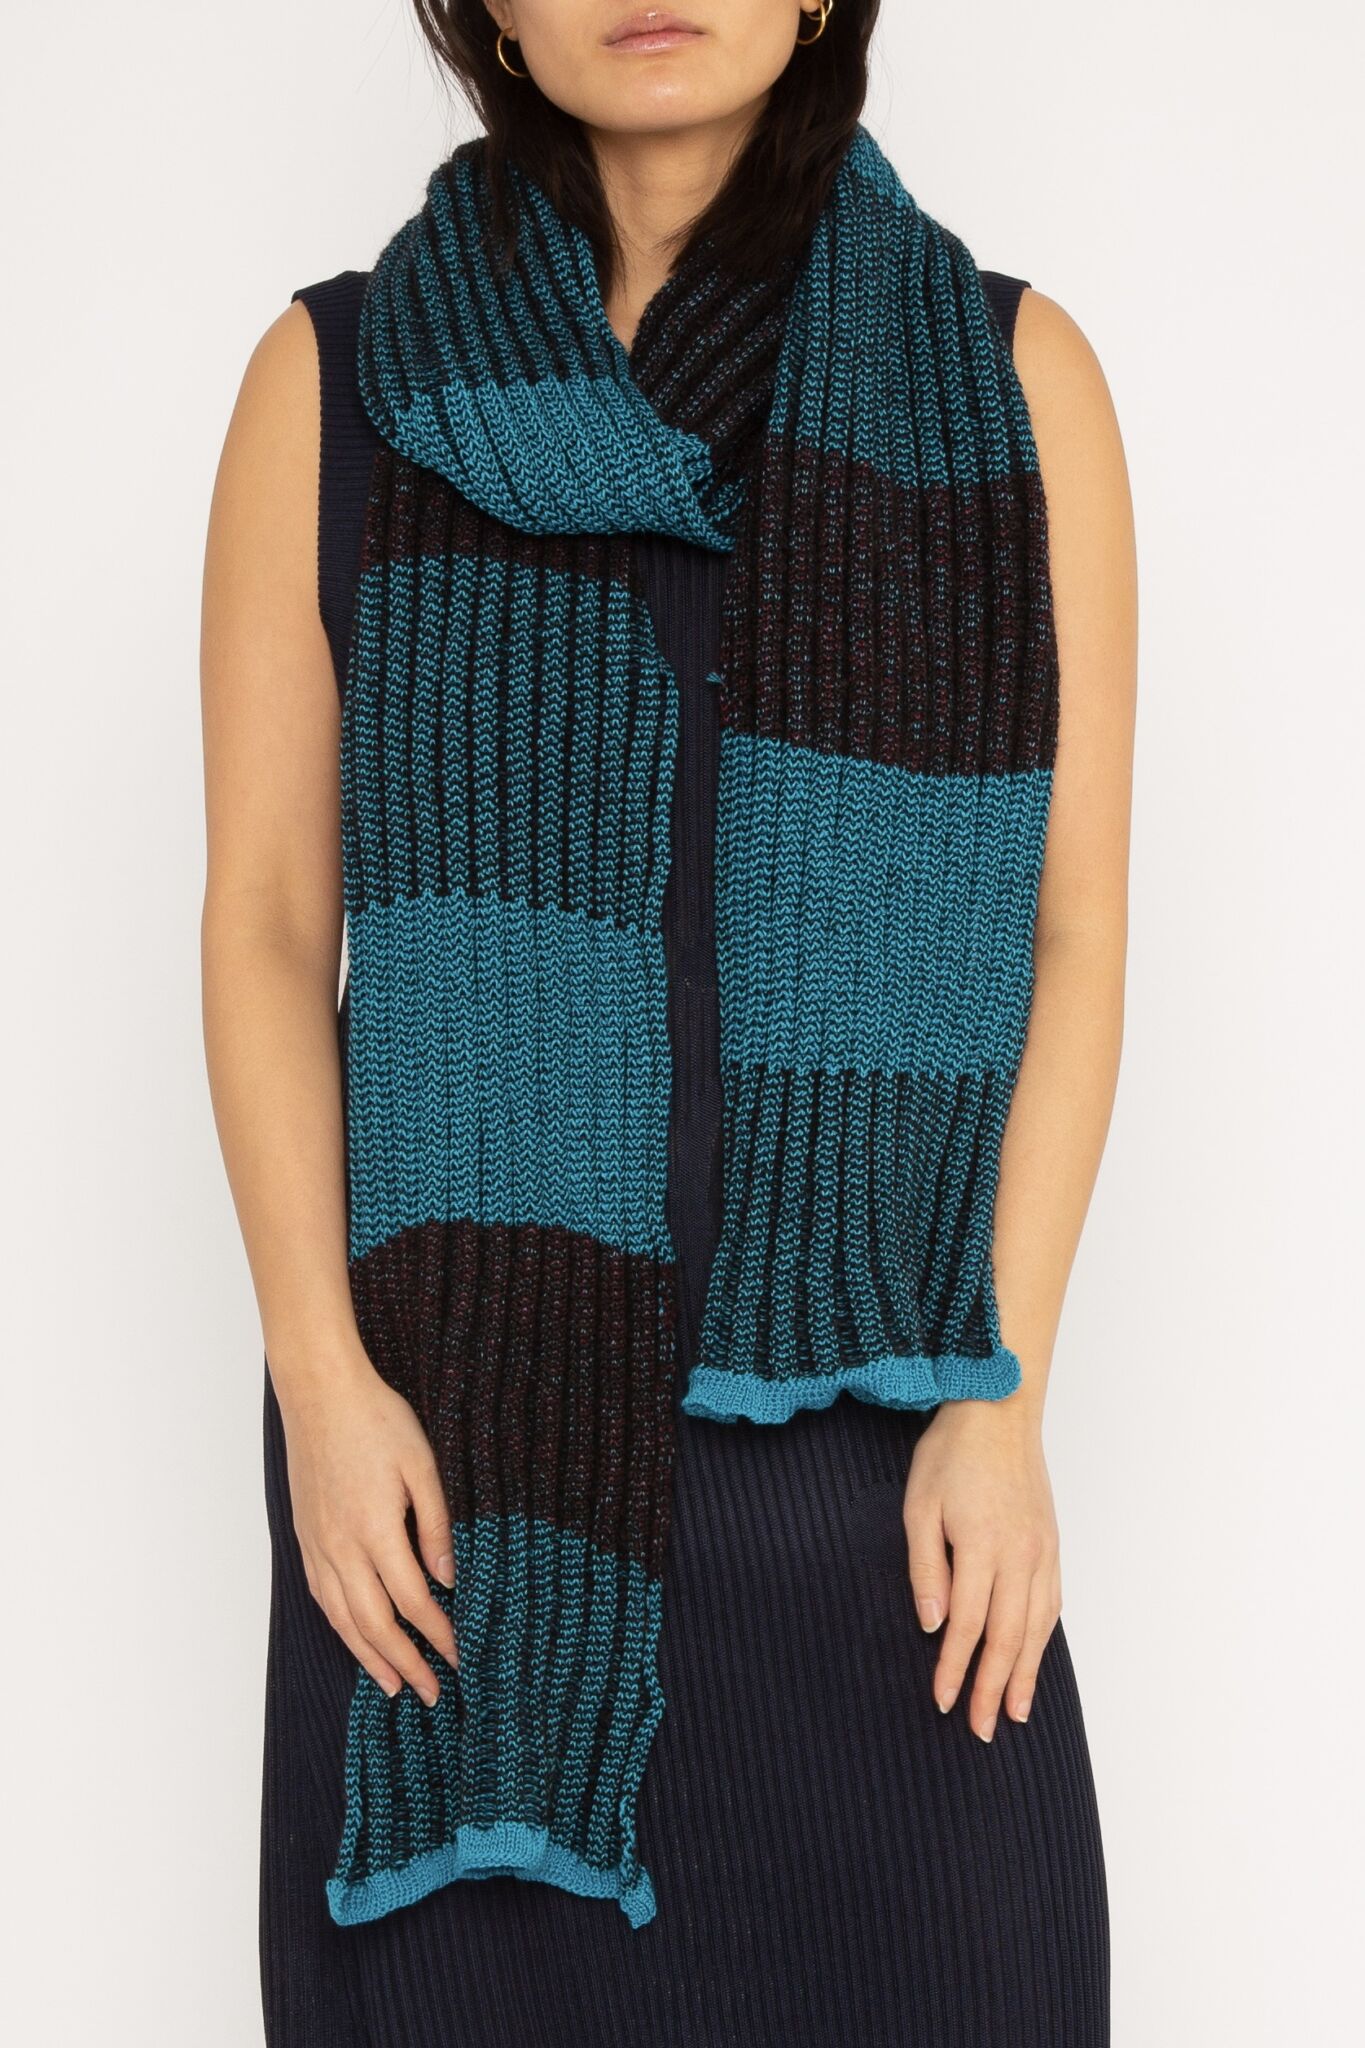 Checked Scarf in turquoise and black is a knitted merino wool and mohair scarf in checked stripes. The textile is soft, airy and lightweight – and most important non-itchy. Detailed with red yarn in the black areas.